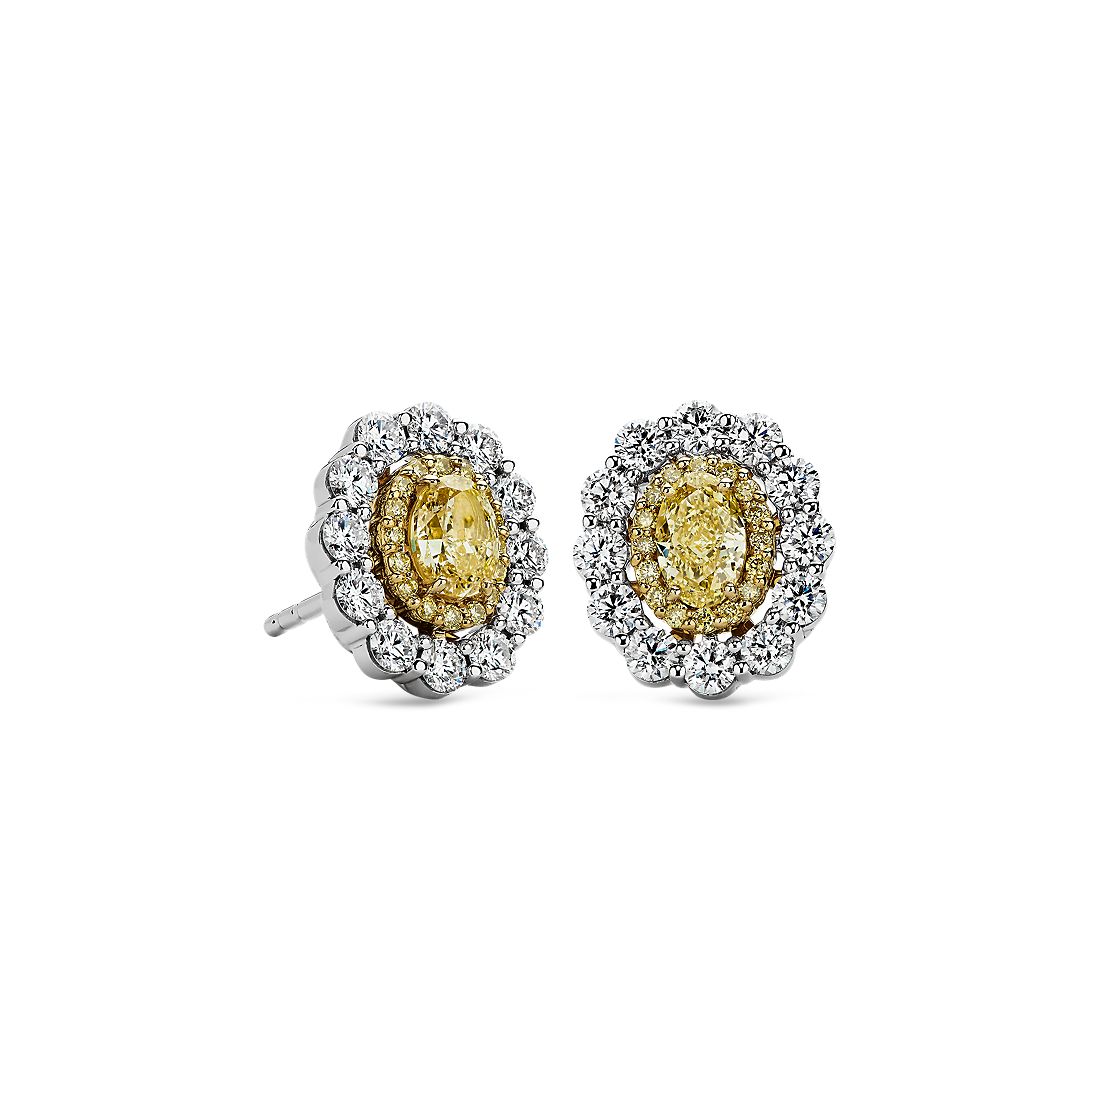 Double Halo Yellow and White Diamond Stud Earrings in 18k Yellow and White Gold (1 1/2 ct. tw.)